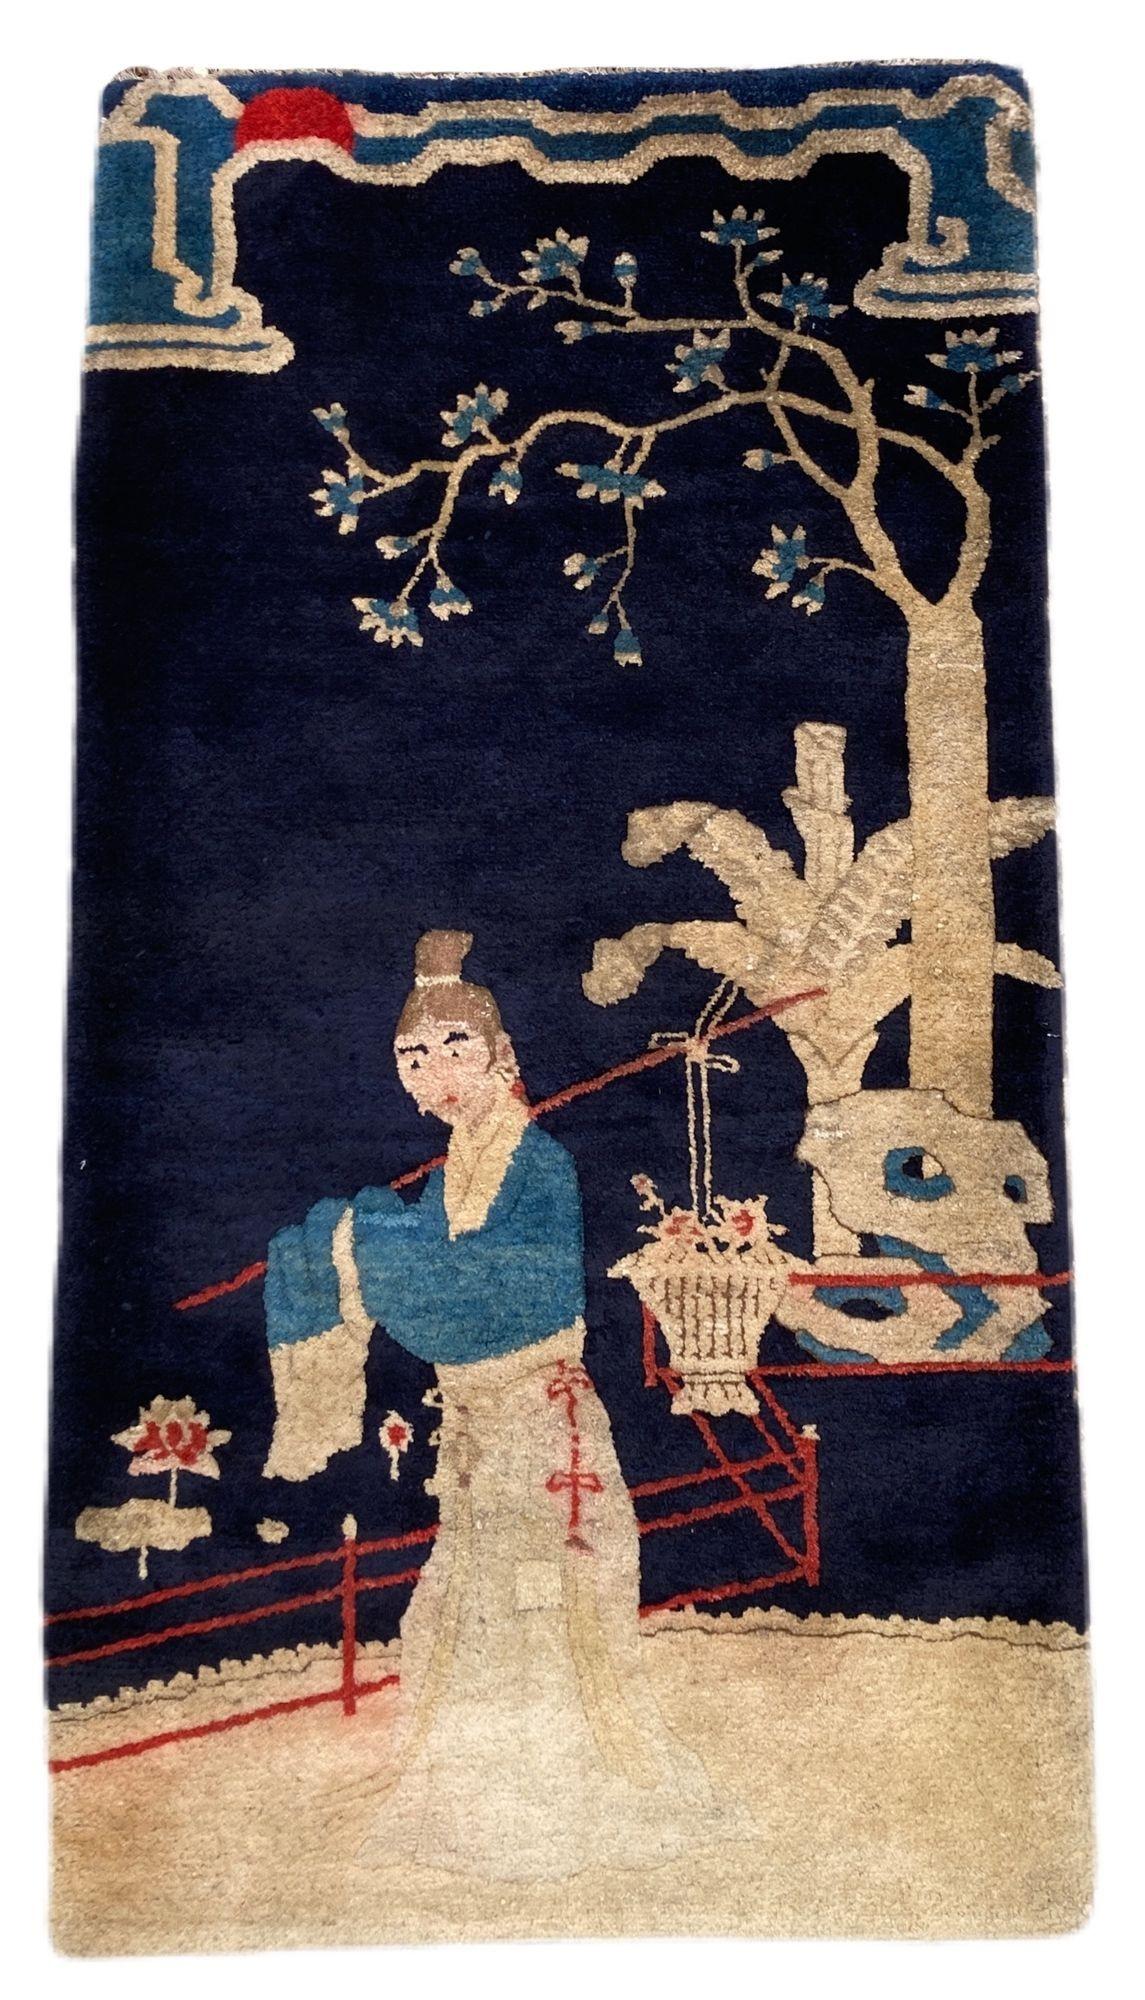 A lovely vintage Pao-Tao rug, handwoven near Beijing in China circa 1940. The design features a girl carrying a basket of flowers beneath a tree on a deep indigo field.
Size: 1.30m x 0.69m (4ft 3in x 2ft 3in).
This rug is in good condition with